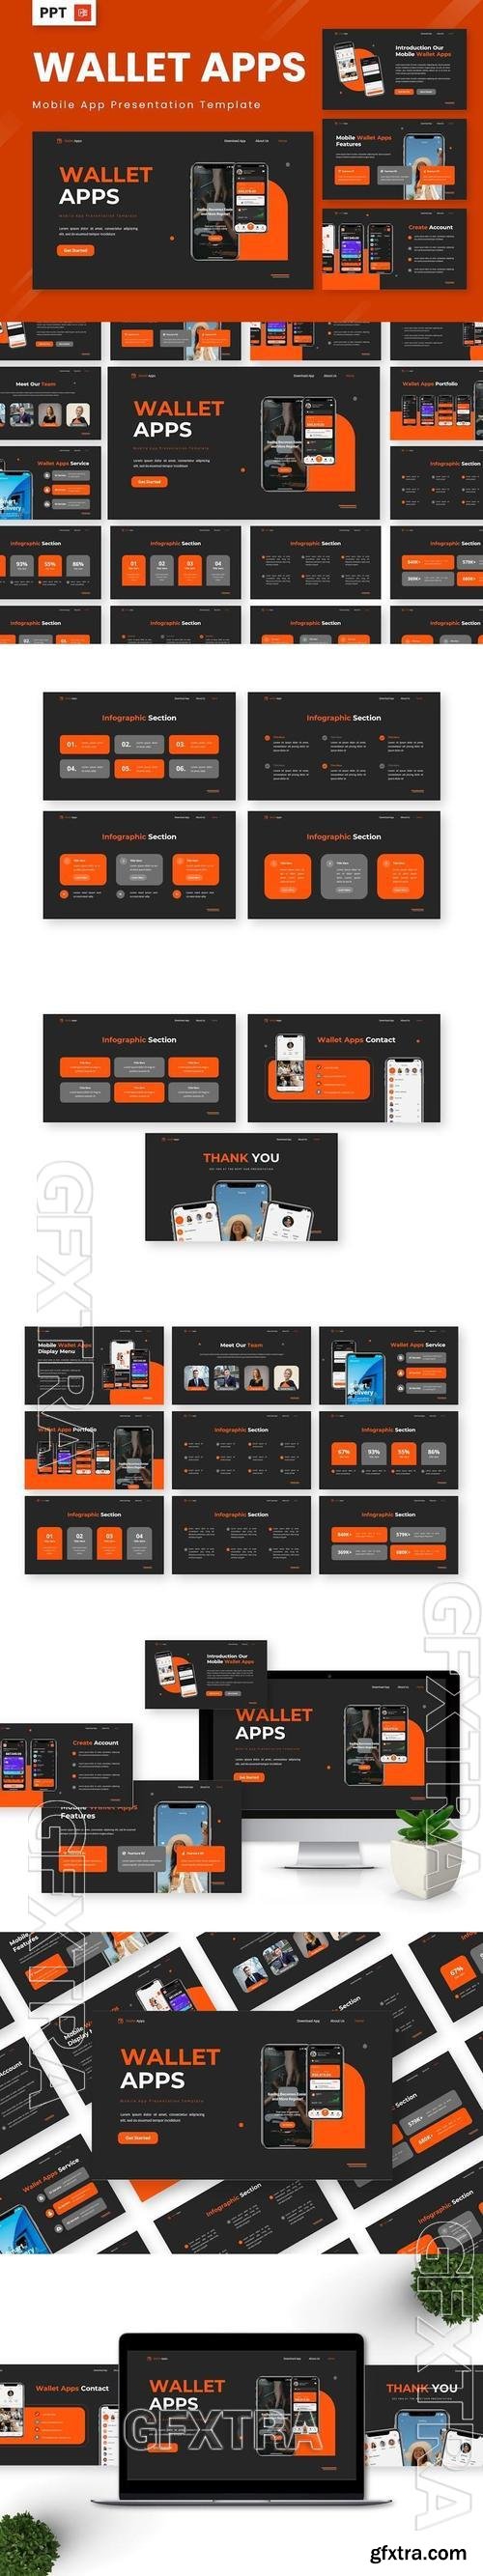 Wallet Apps - Mobile App Powerpoint Templates YZ8HSQ6